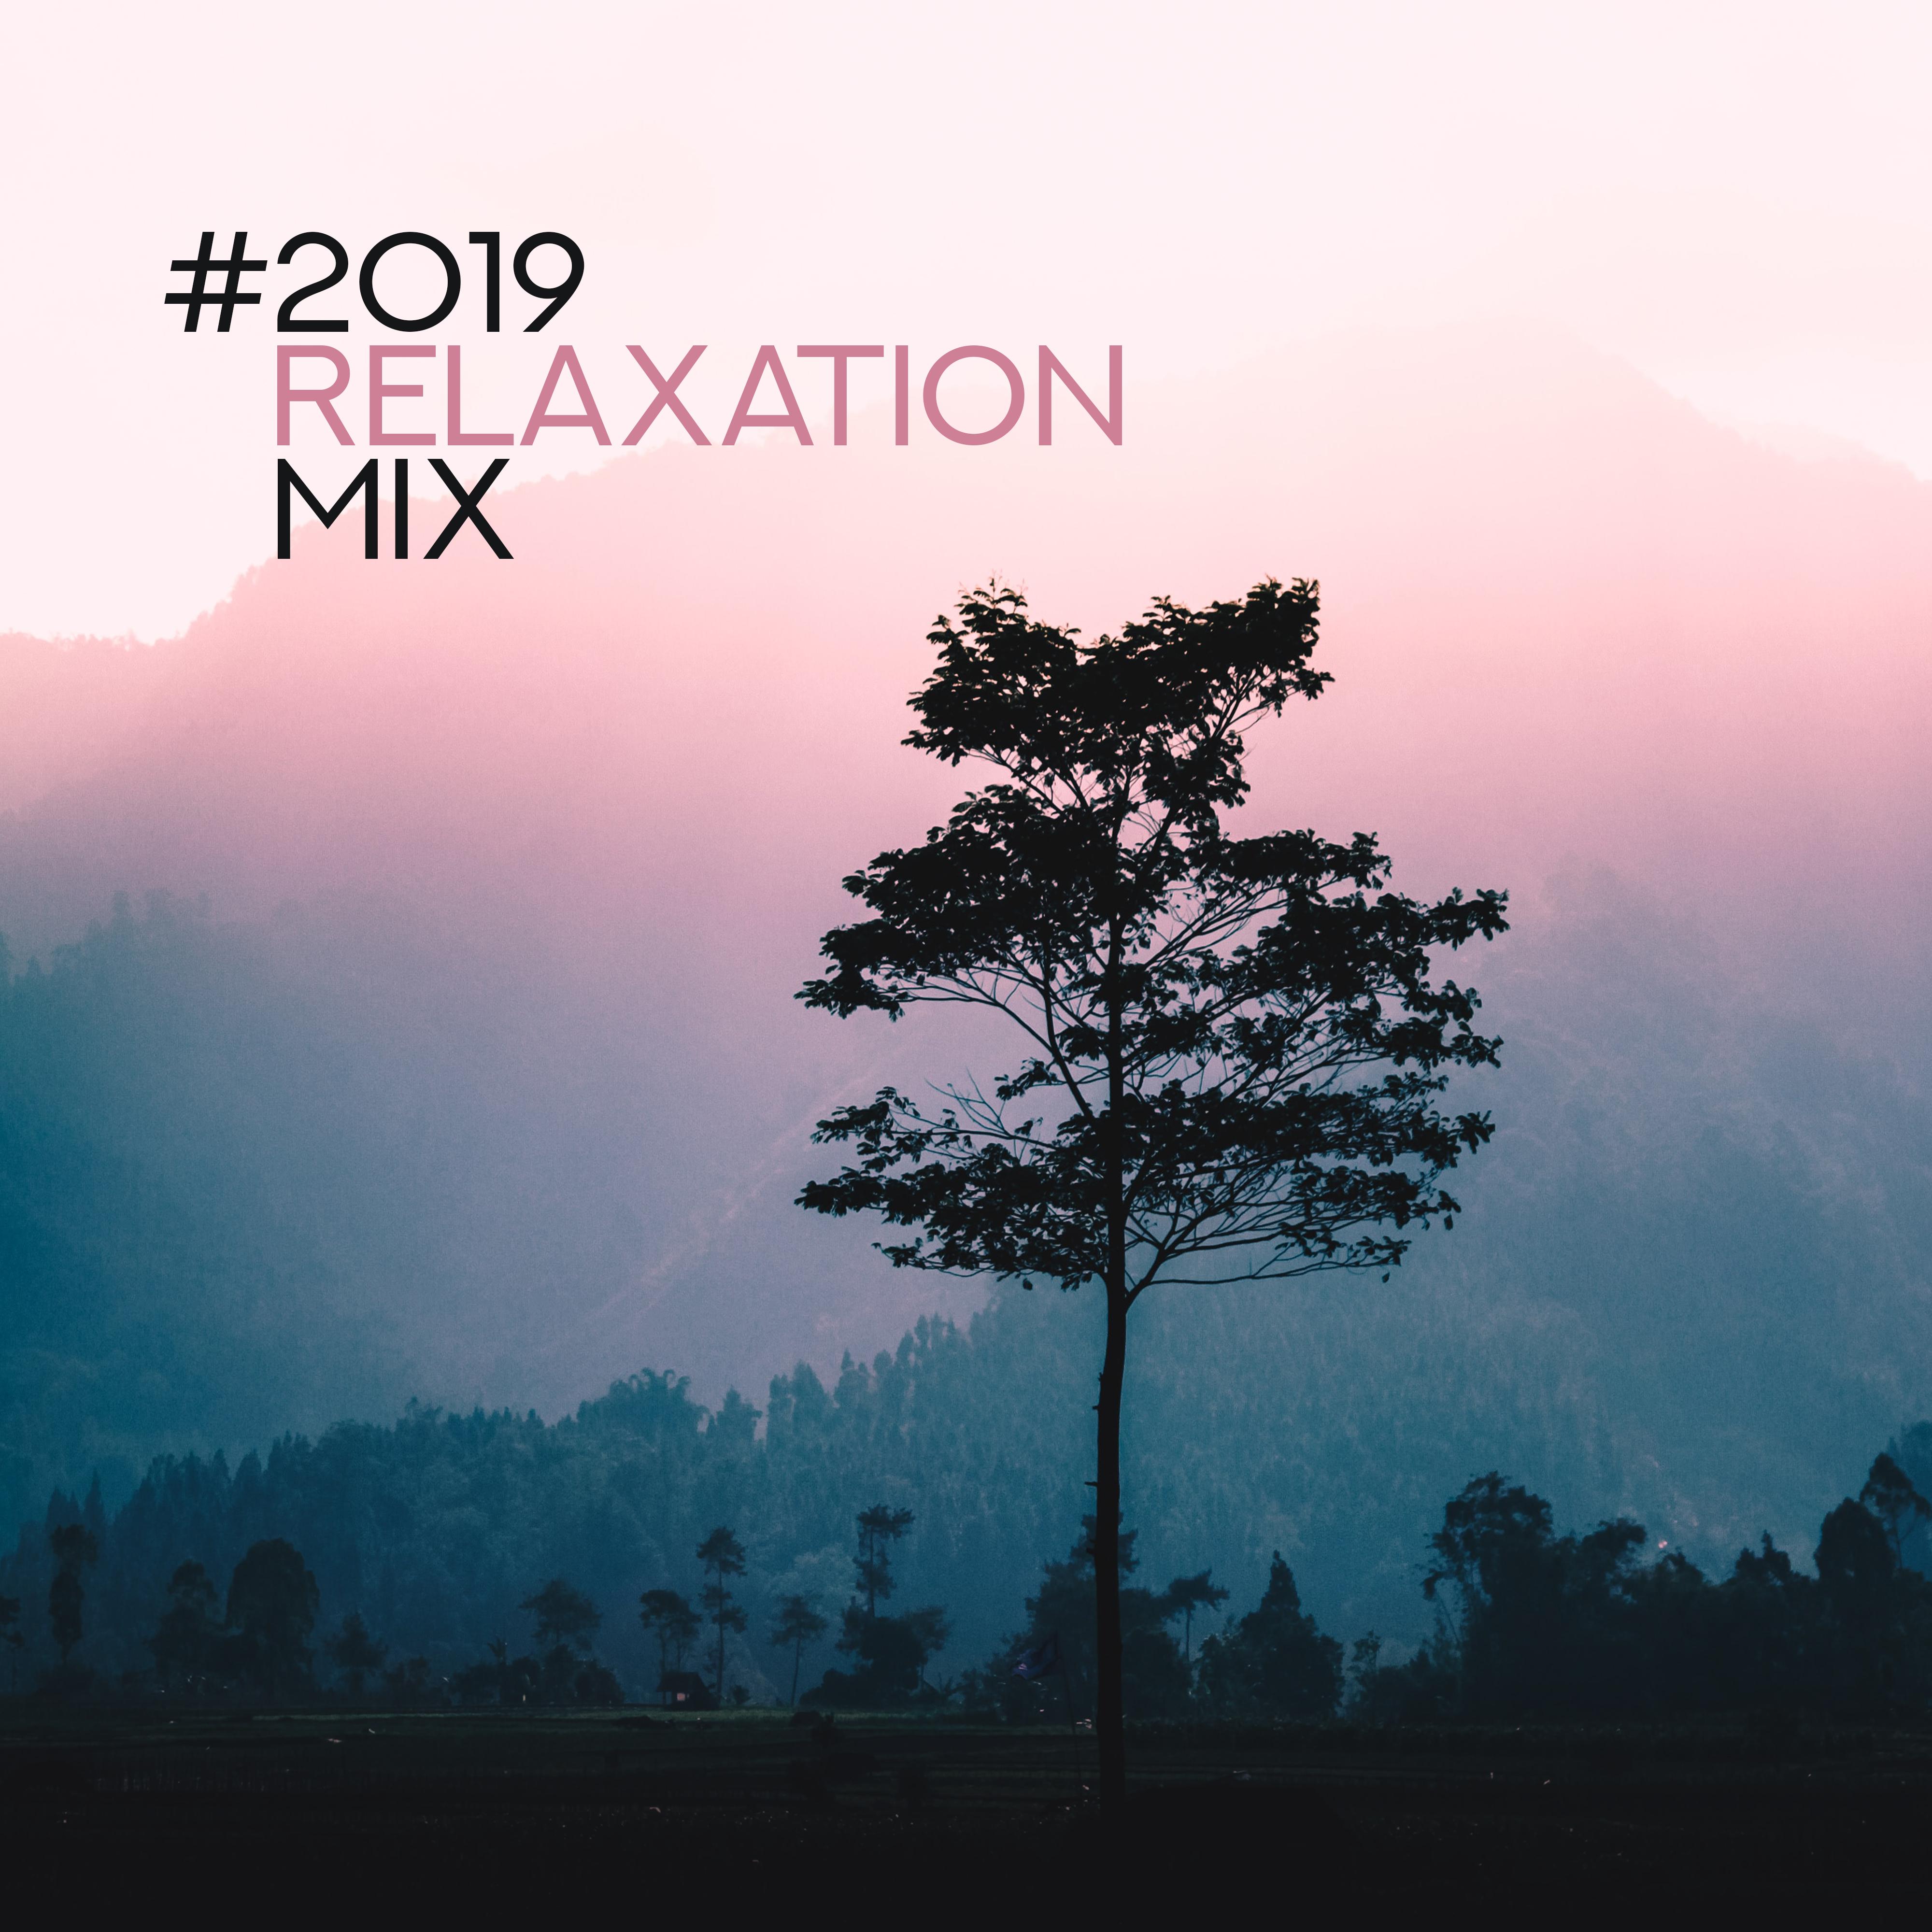 #2019 Relaxation Mix – Compilation of Most Relaxing Ambient & Nature New Age Soothing Music, Songs for Total Calming Down, Stress Relief, Full Rest After Long Day